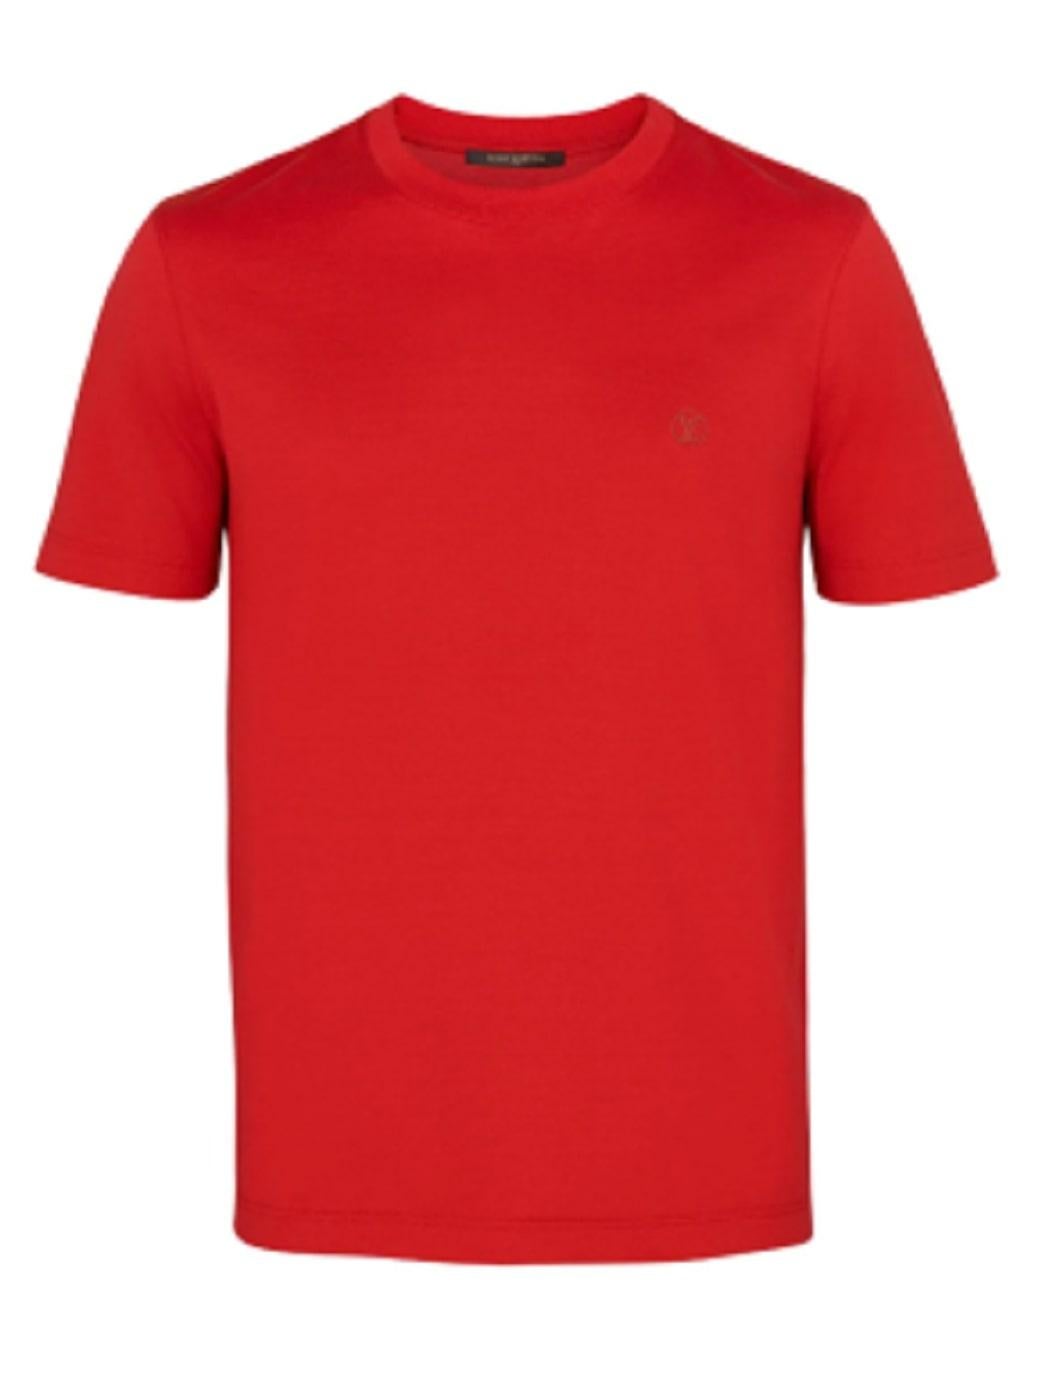 Louis Vuitton Red Embroidered Logo T-shirt

- Red, soft cotton Louis Vuitton t-shirt
- Small, embroidered red circular LV logo
- Round-neck neckline

Materials:
100% Cotton

Made in Italy
Gentle dry-clean only

PLEASE NOTE, THESE ITEMS ARE PRE-OWNED